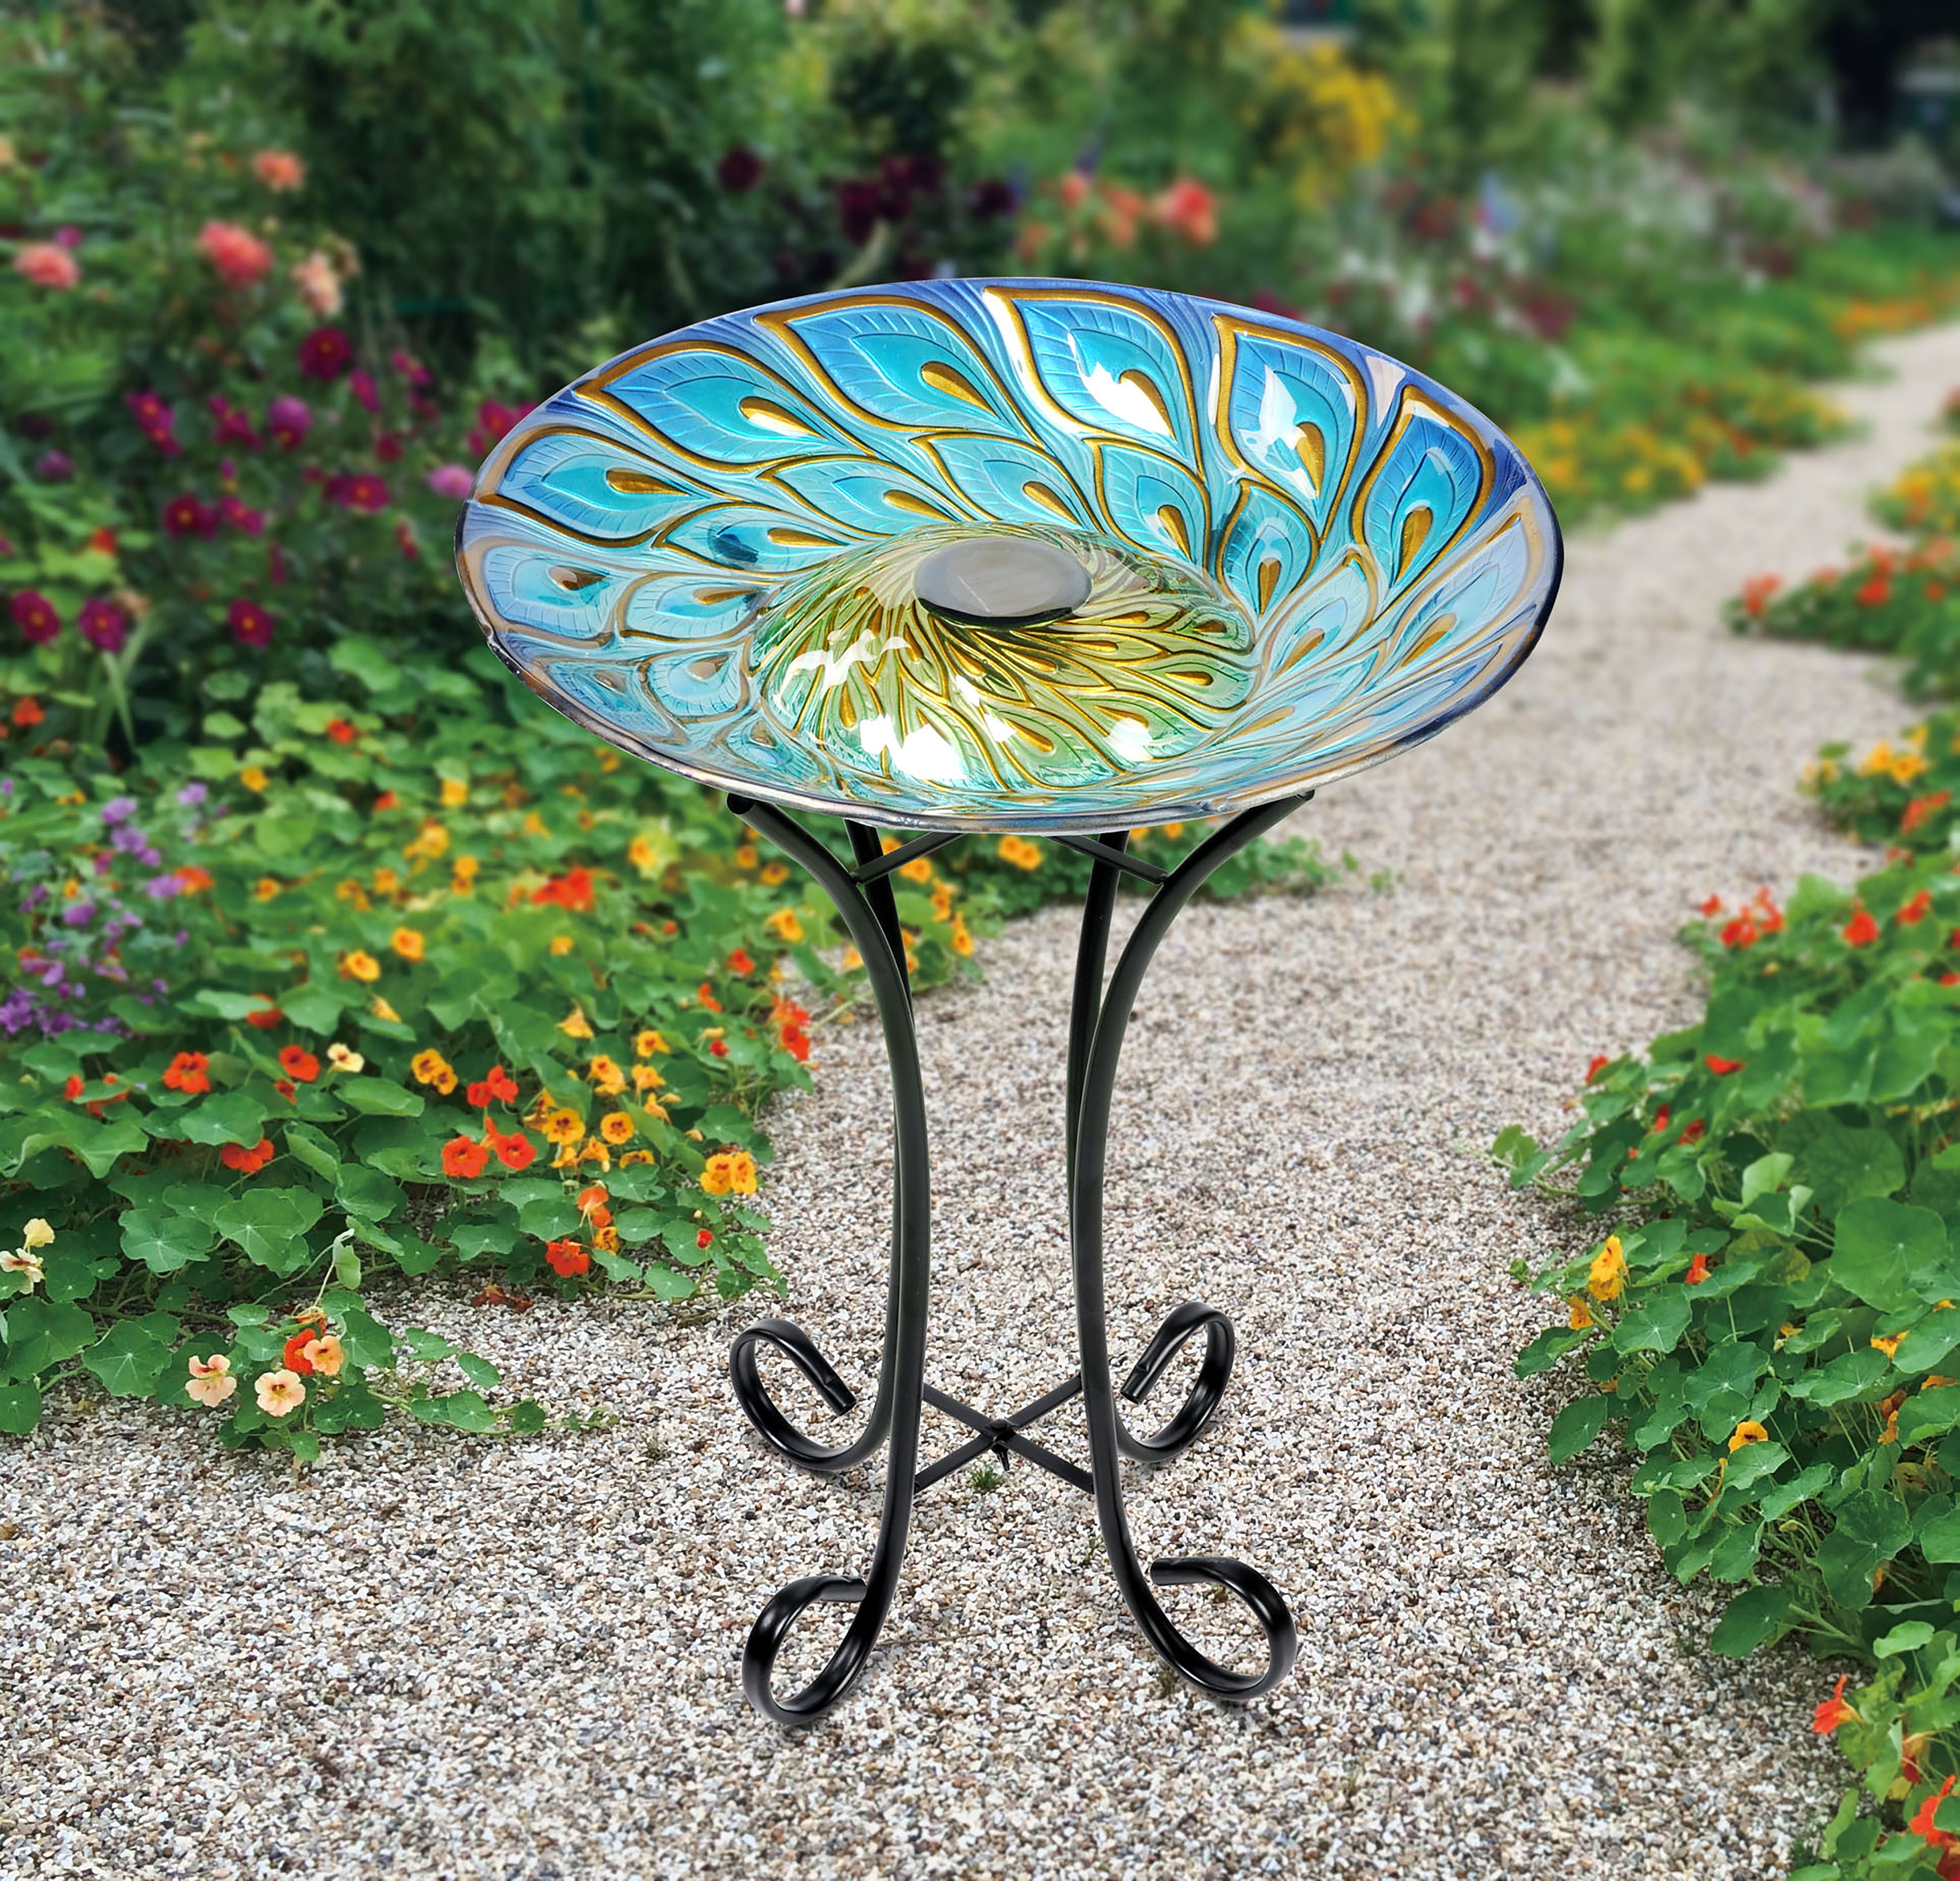 Panacea 82905 16 in Peacock Glass Bird Bath with Stand